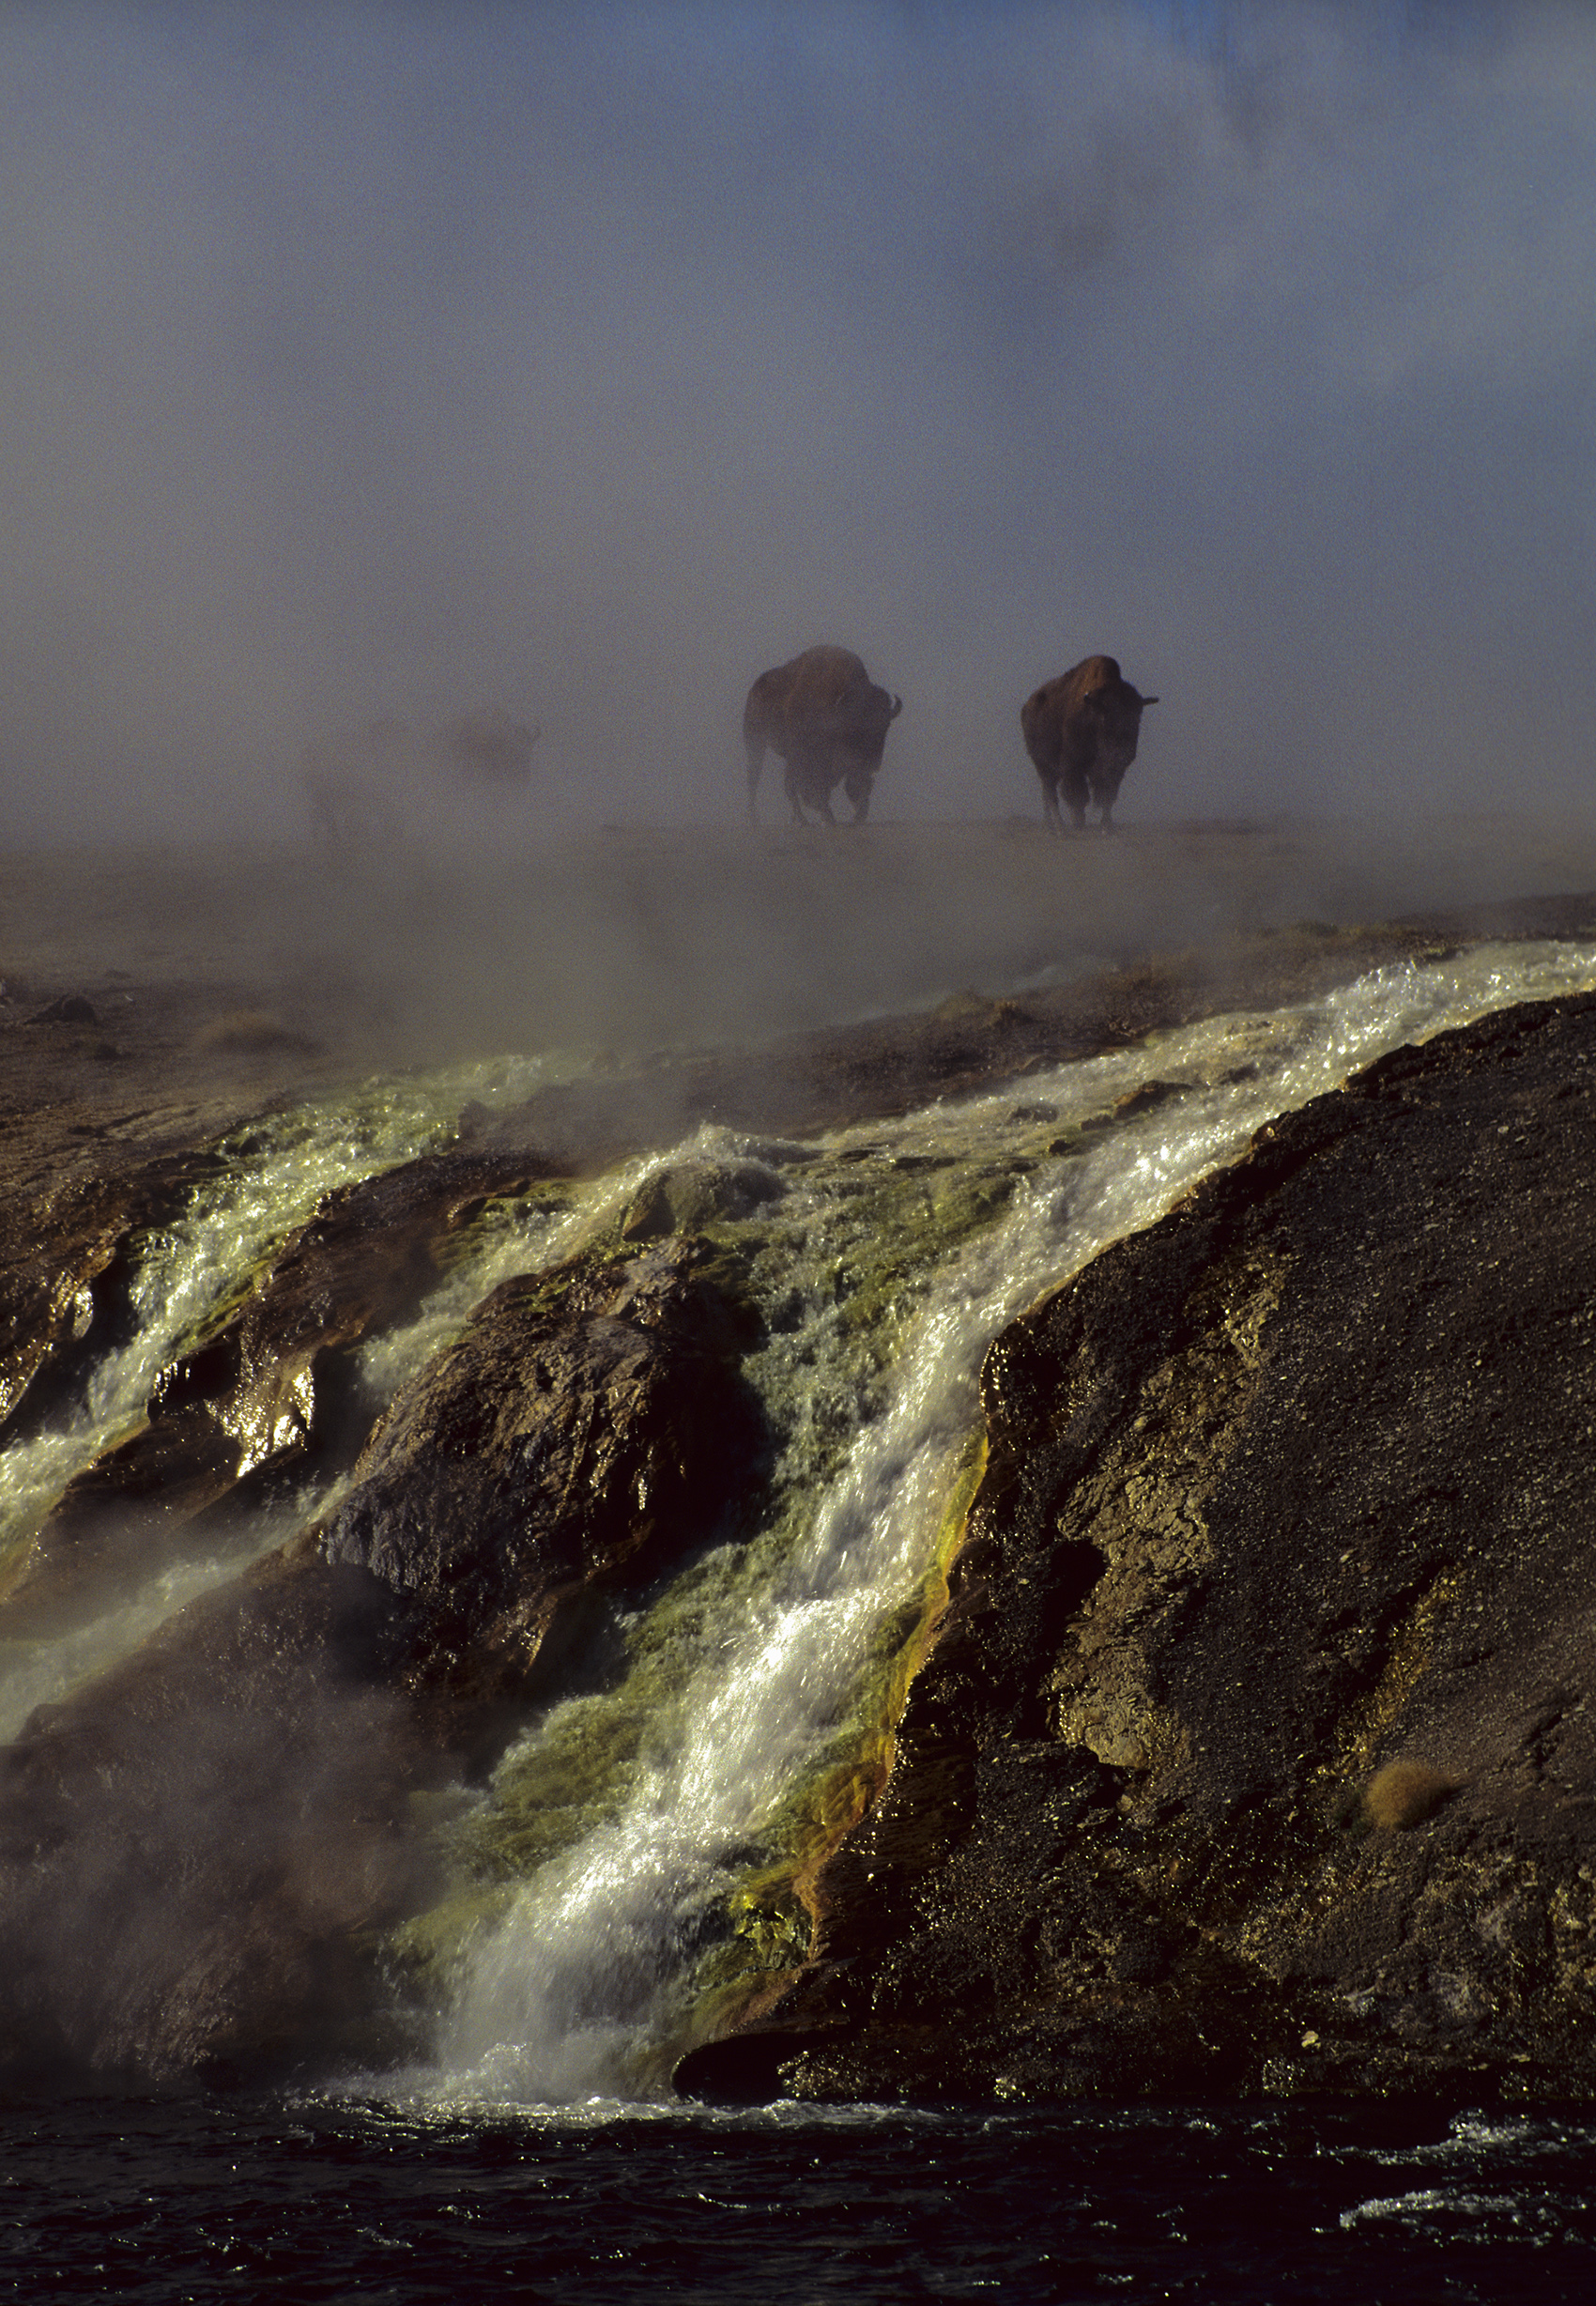 Bison in the mist